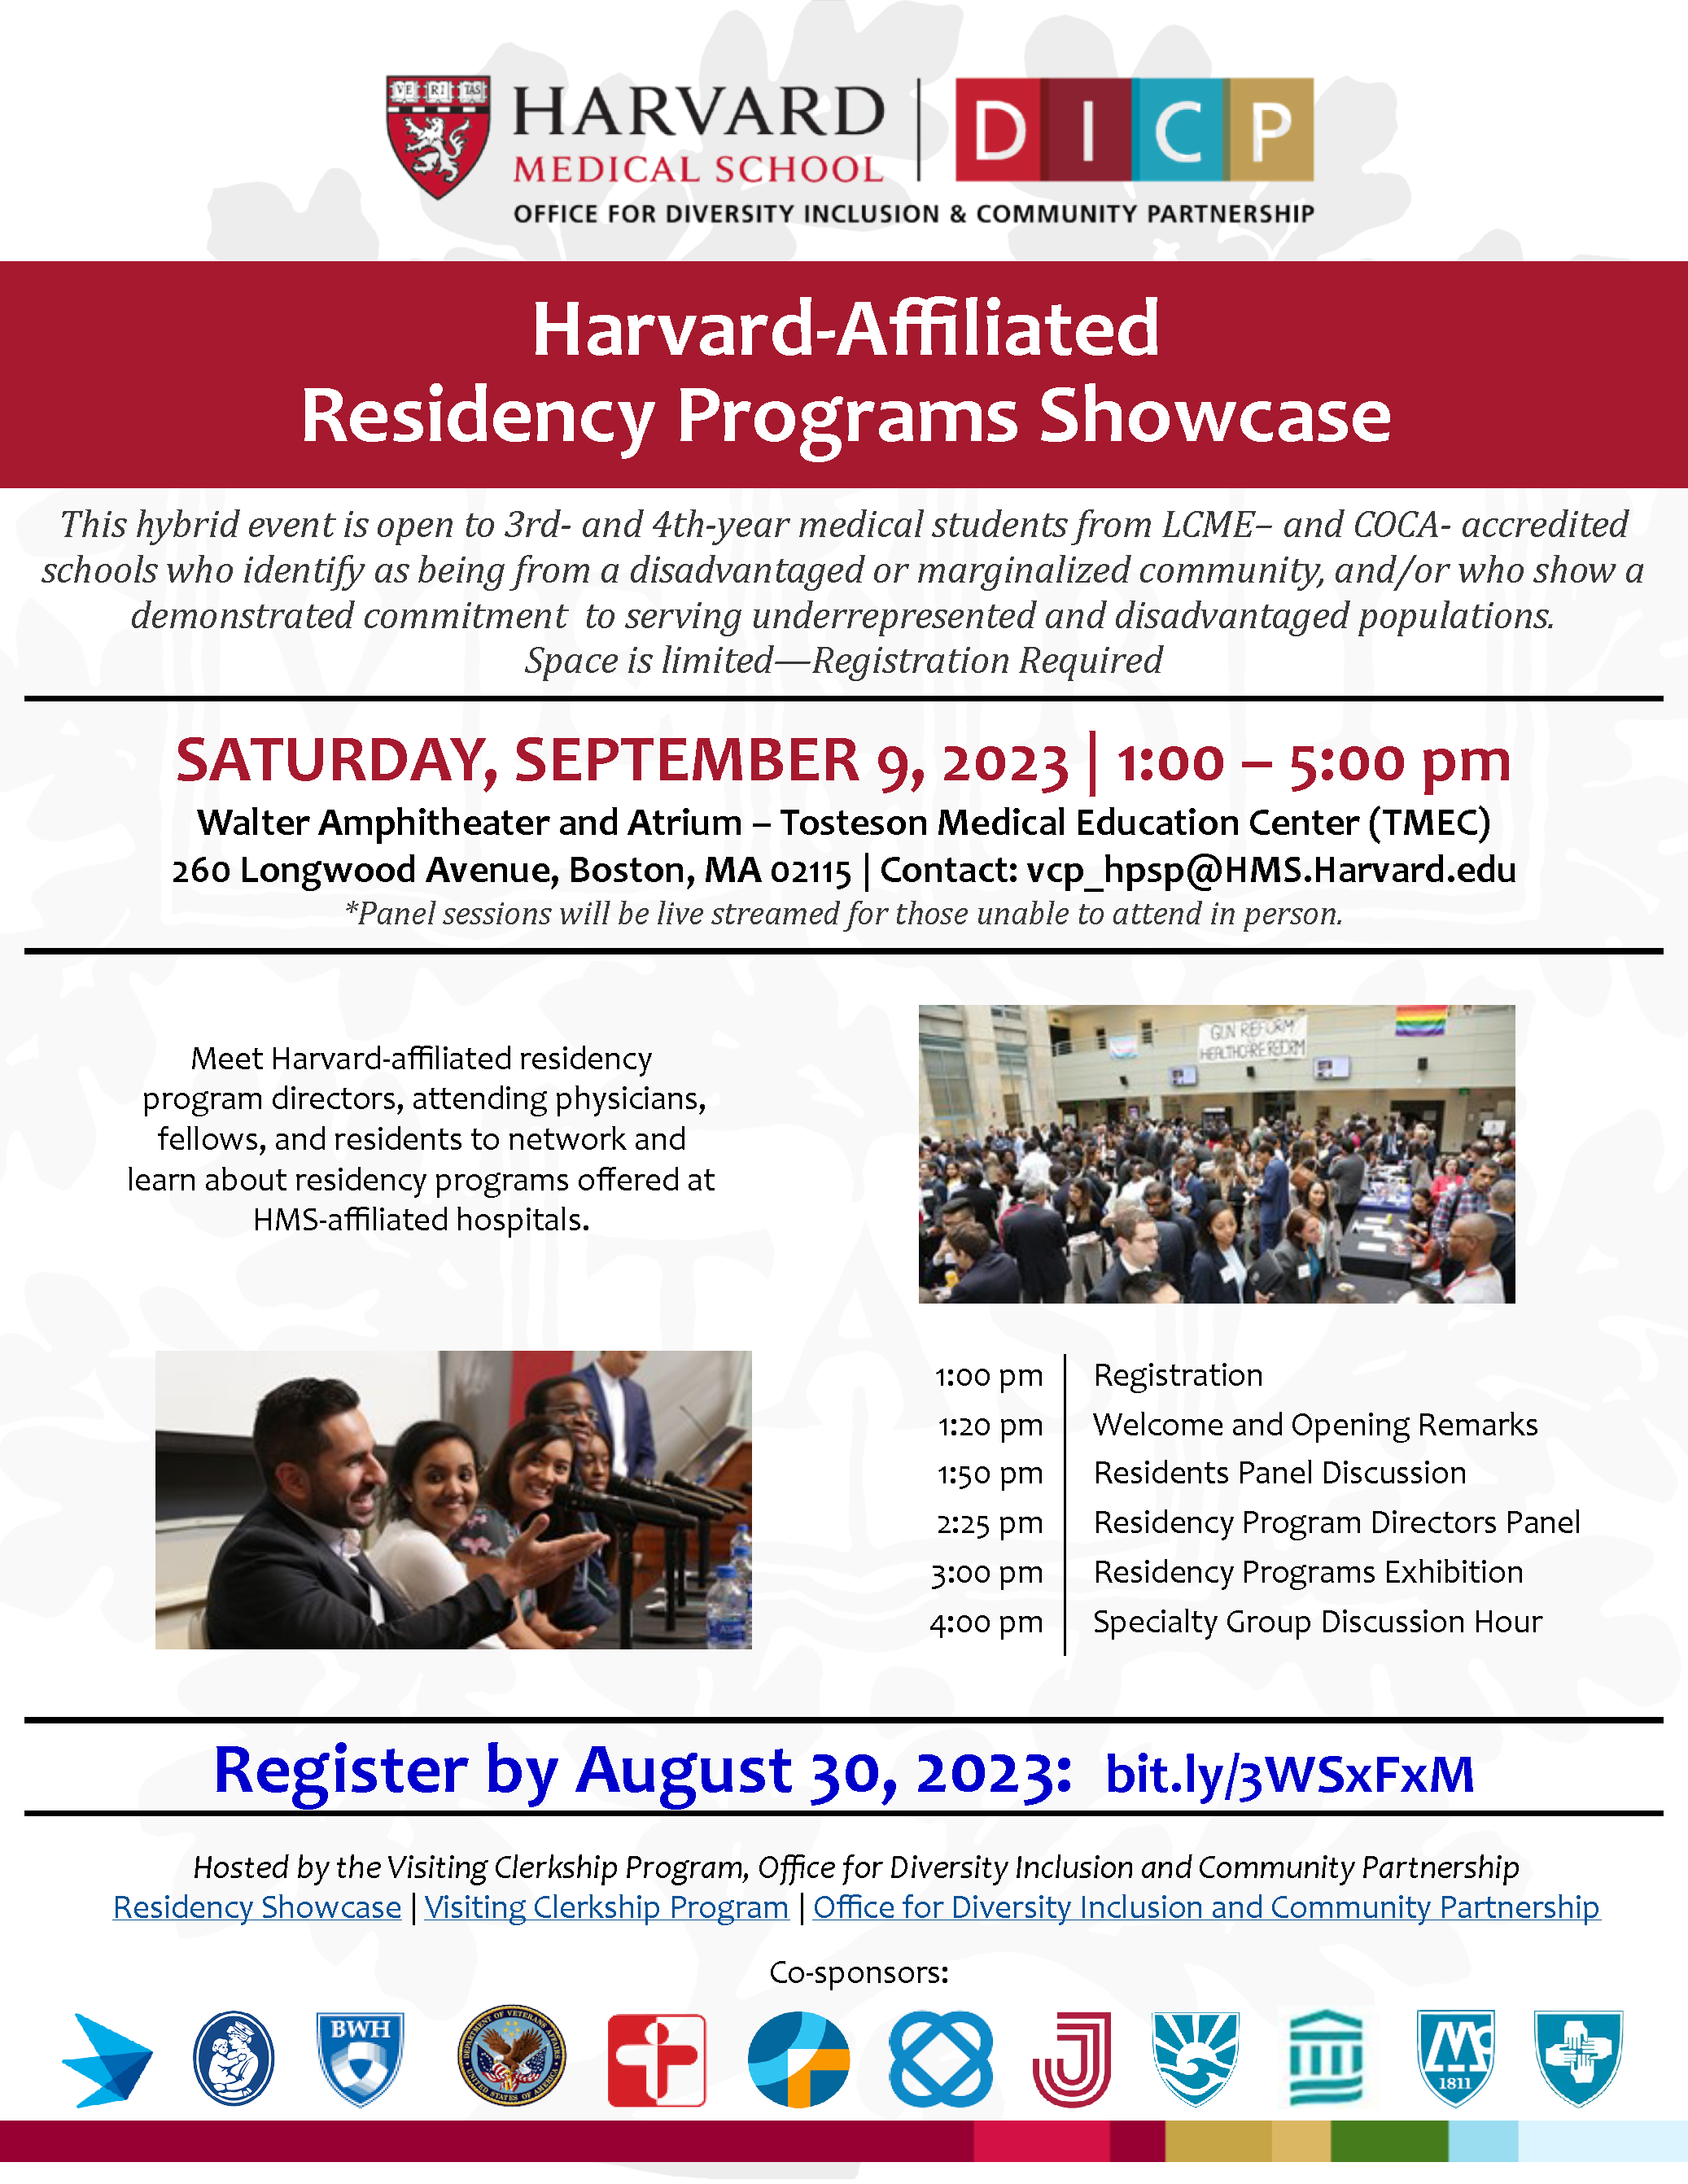 Meet Harvard-affiliated residency program directors, attending physicians, fellows, and residents to network.